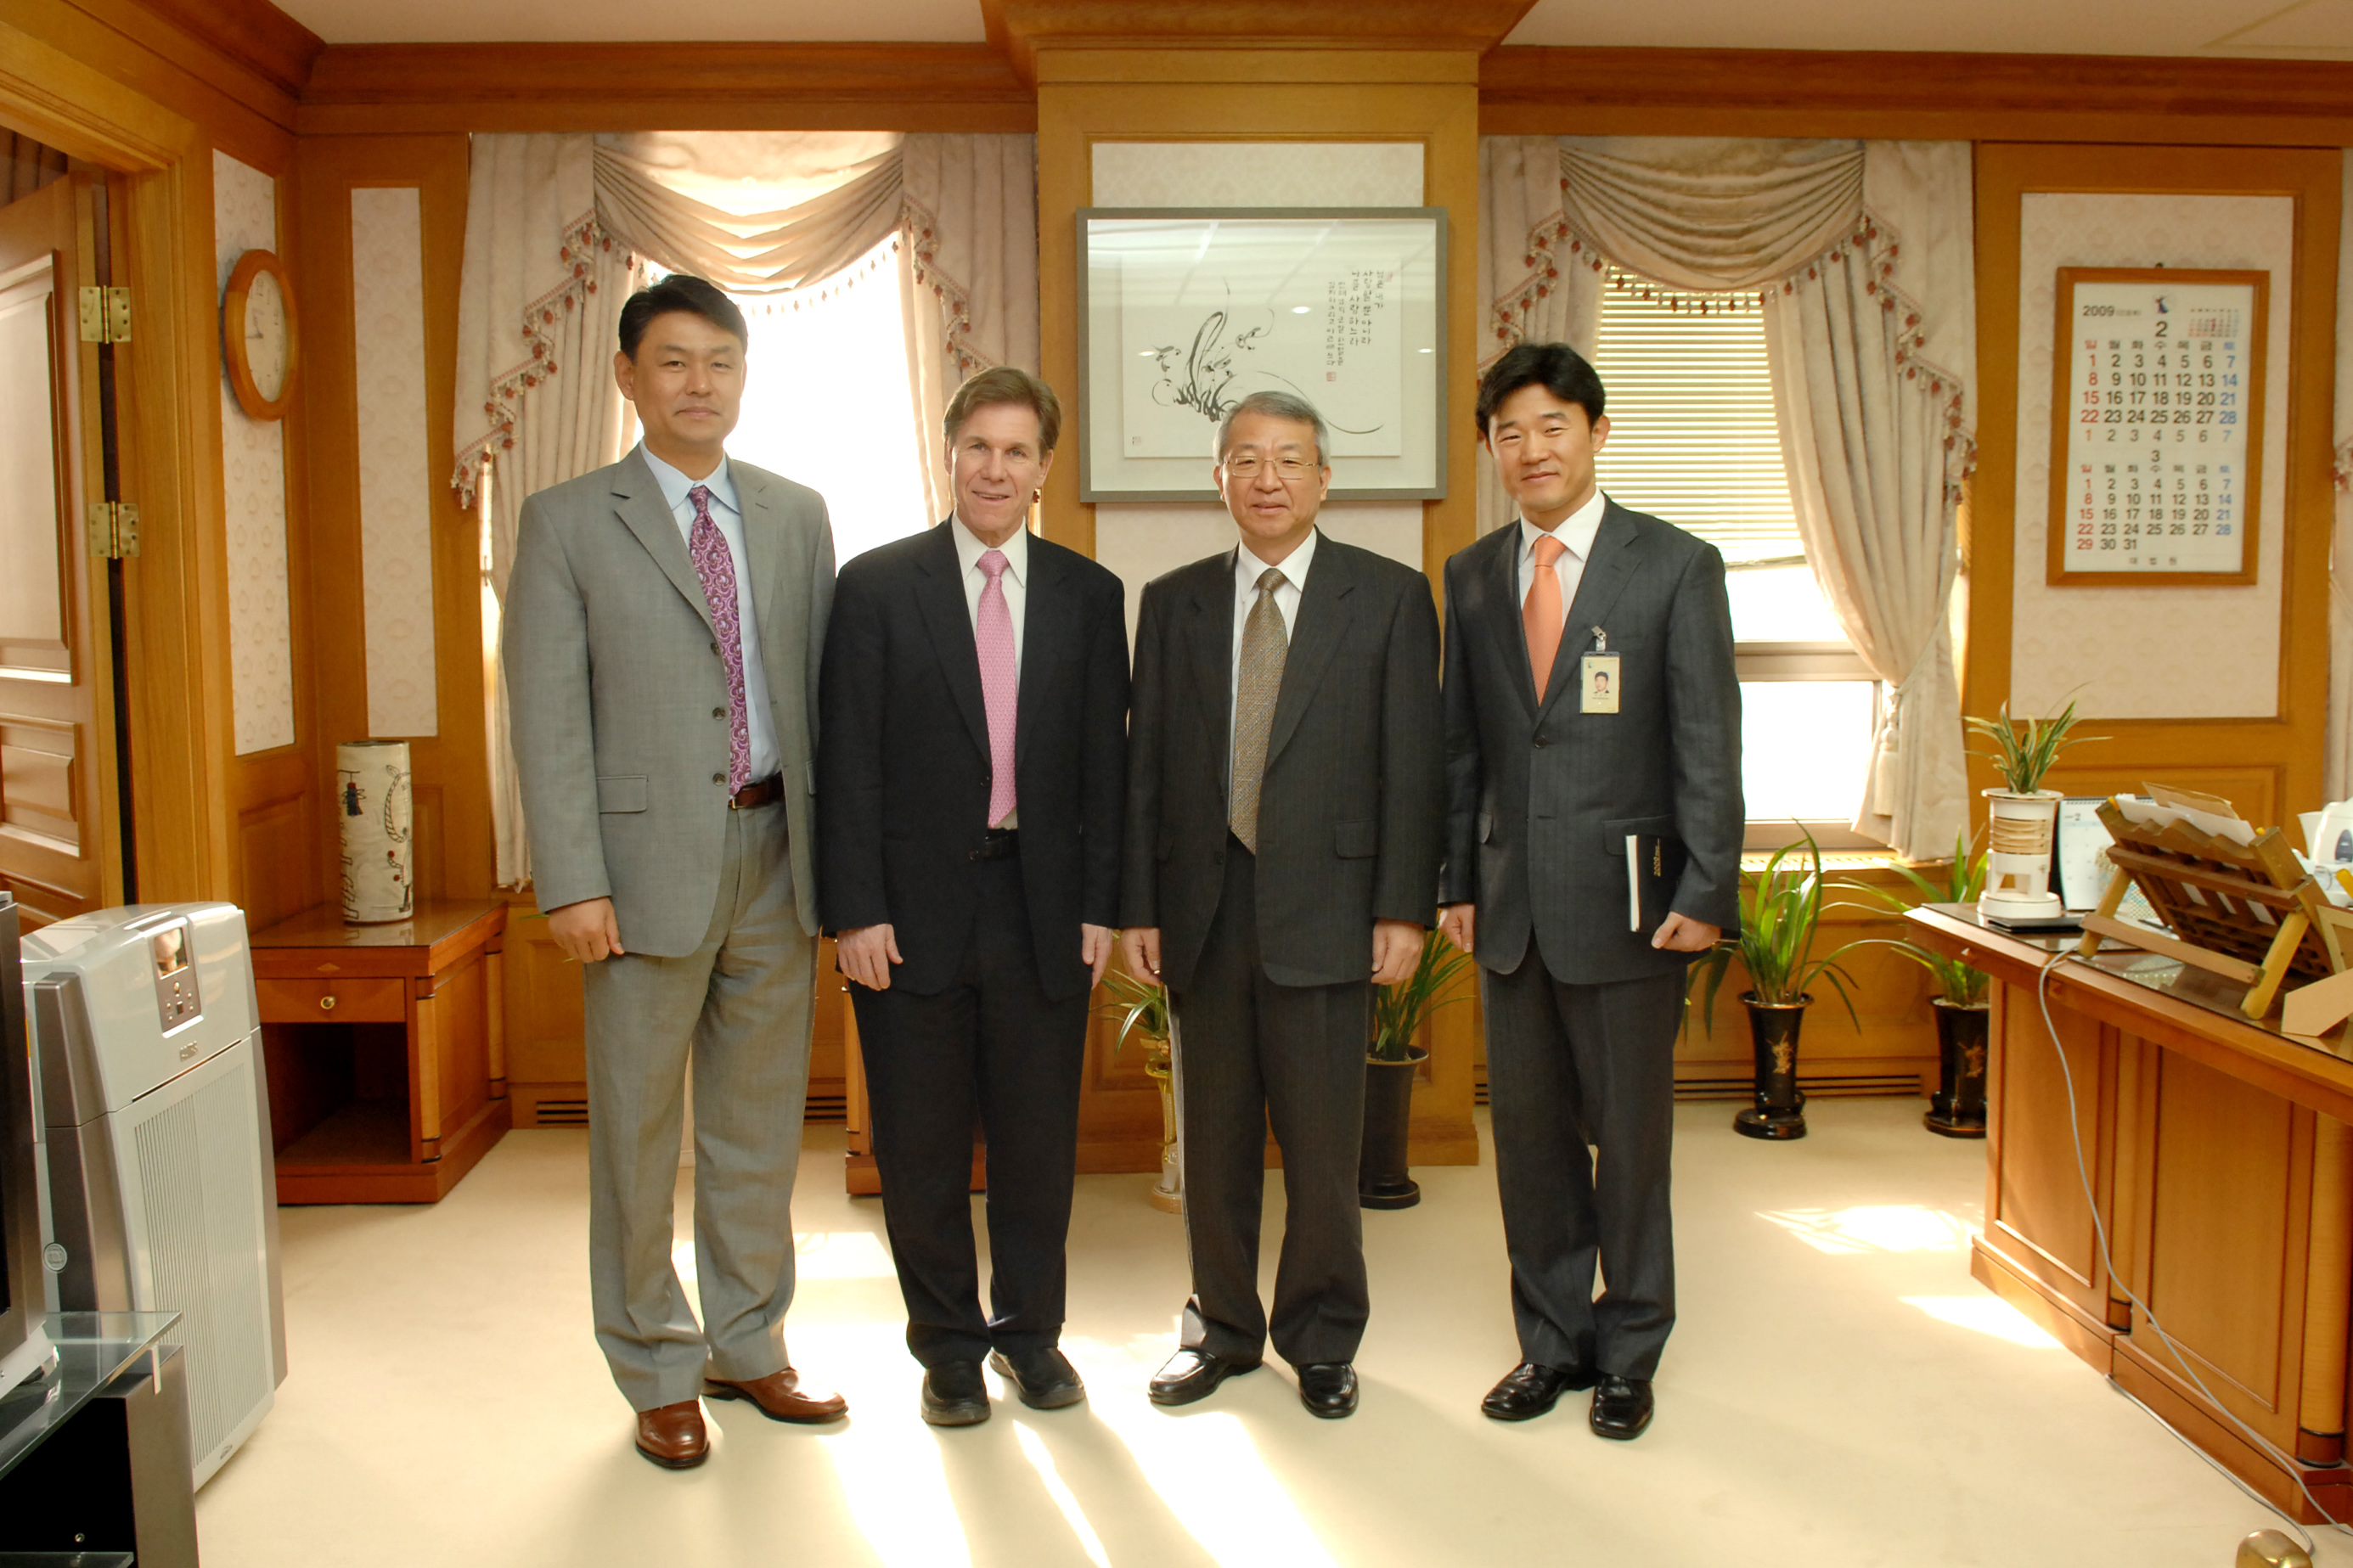 [02_20_09]Judge Randall R. Rader of the Court of Appeals for Federal Circuit visits the Supreme Court of Korea